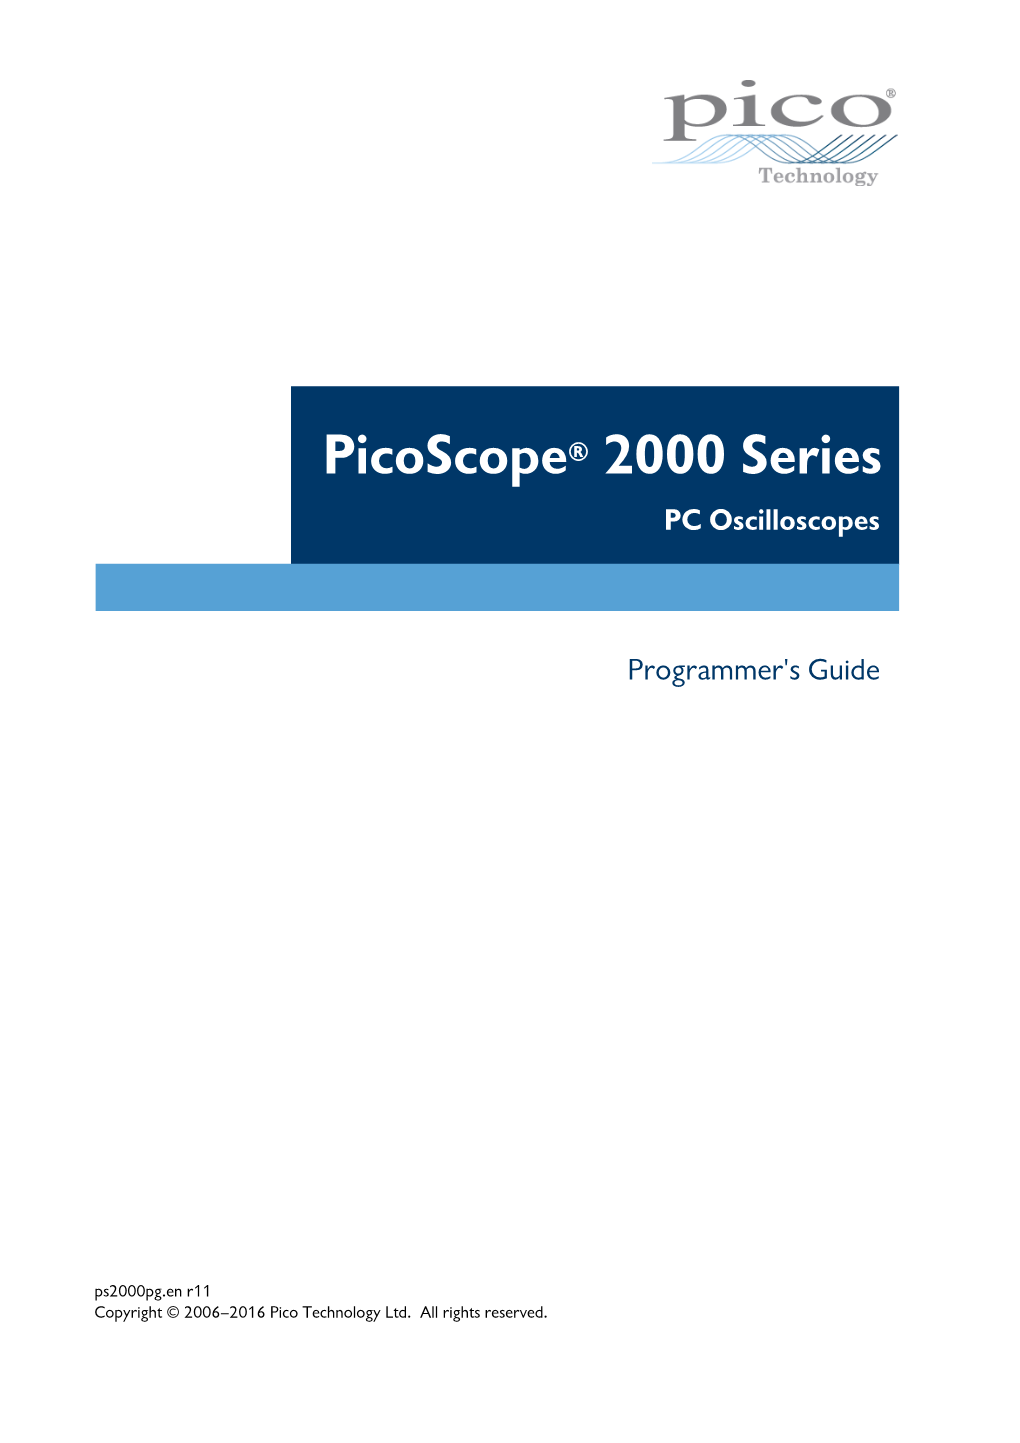 Picoscope 2000 Series Programmer's Guide I Contents 1 Introduction